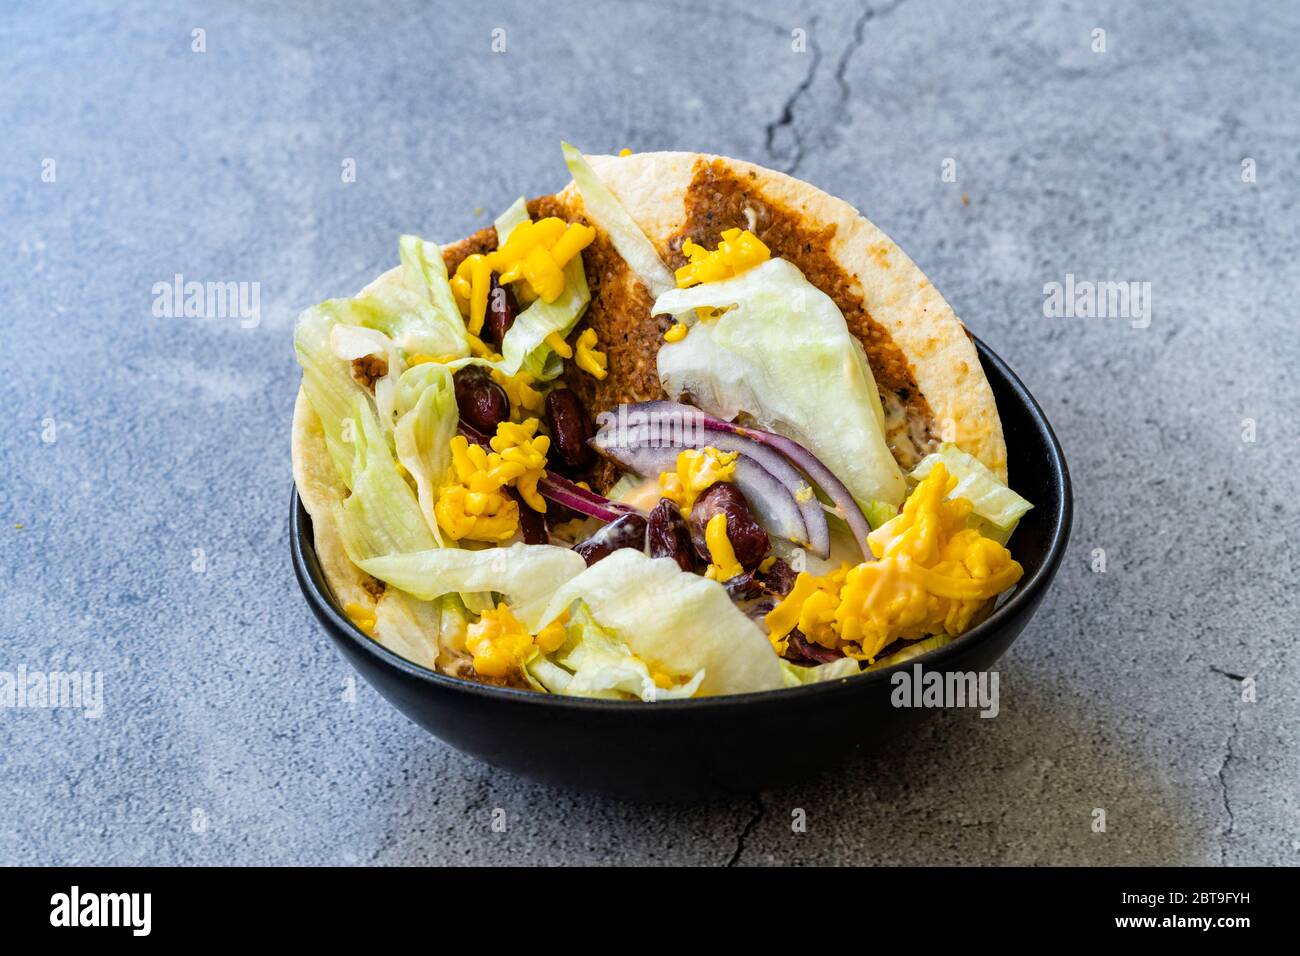 Turkish Mexican Style Taco Cig Kofte with Kidney Beans, Red Onions, Grated Cheddar Cheese and Pomegranate Syrup Sauce. Traditional Fast Food. Stock Photo